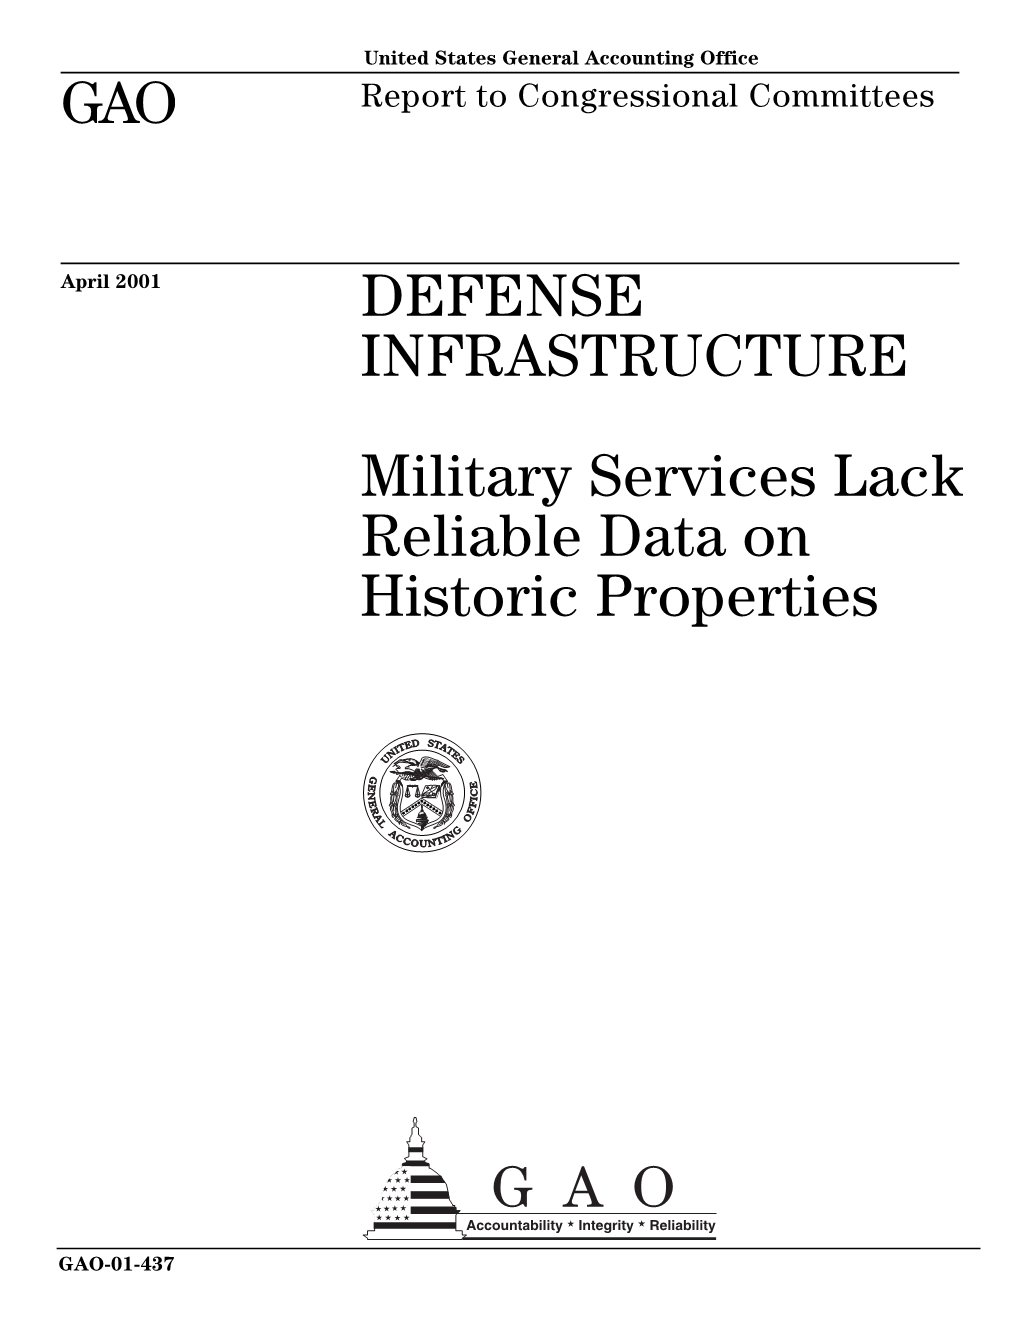 GAO-01-437 Defense Infrastructure: Military Services Lack Reliable Data on Historic Properties